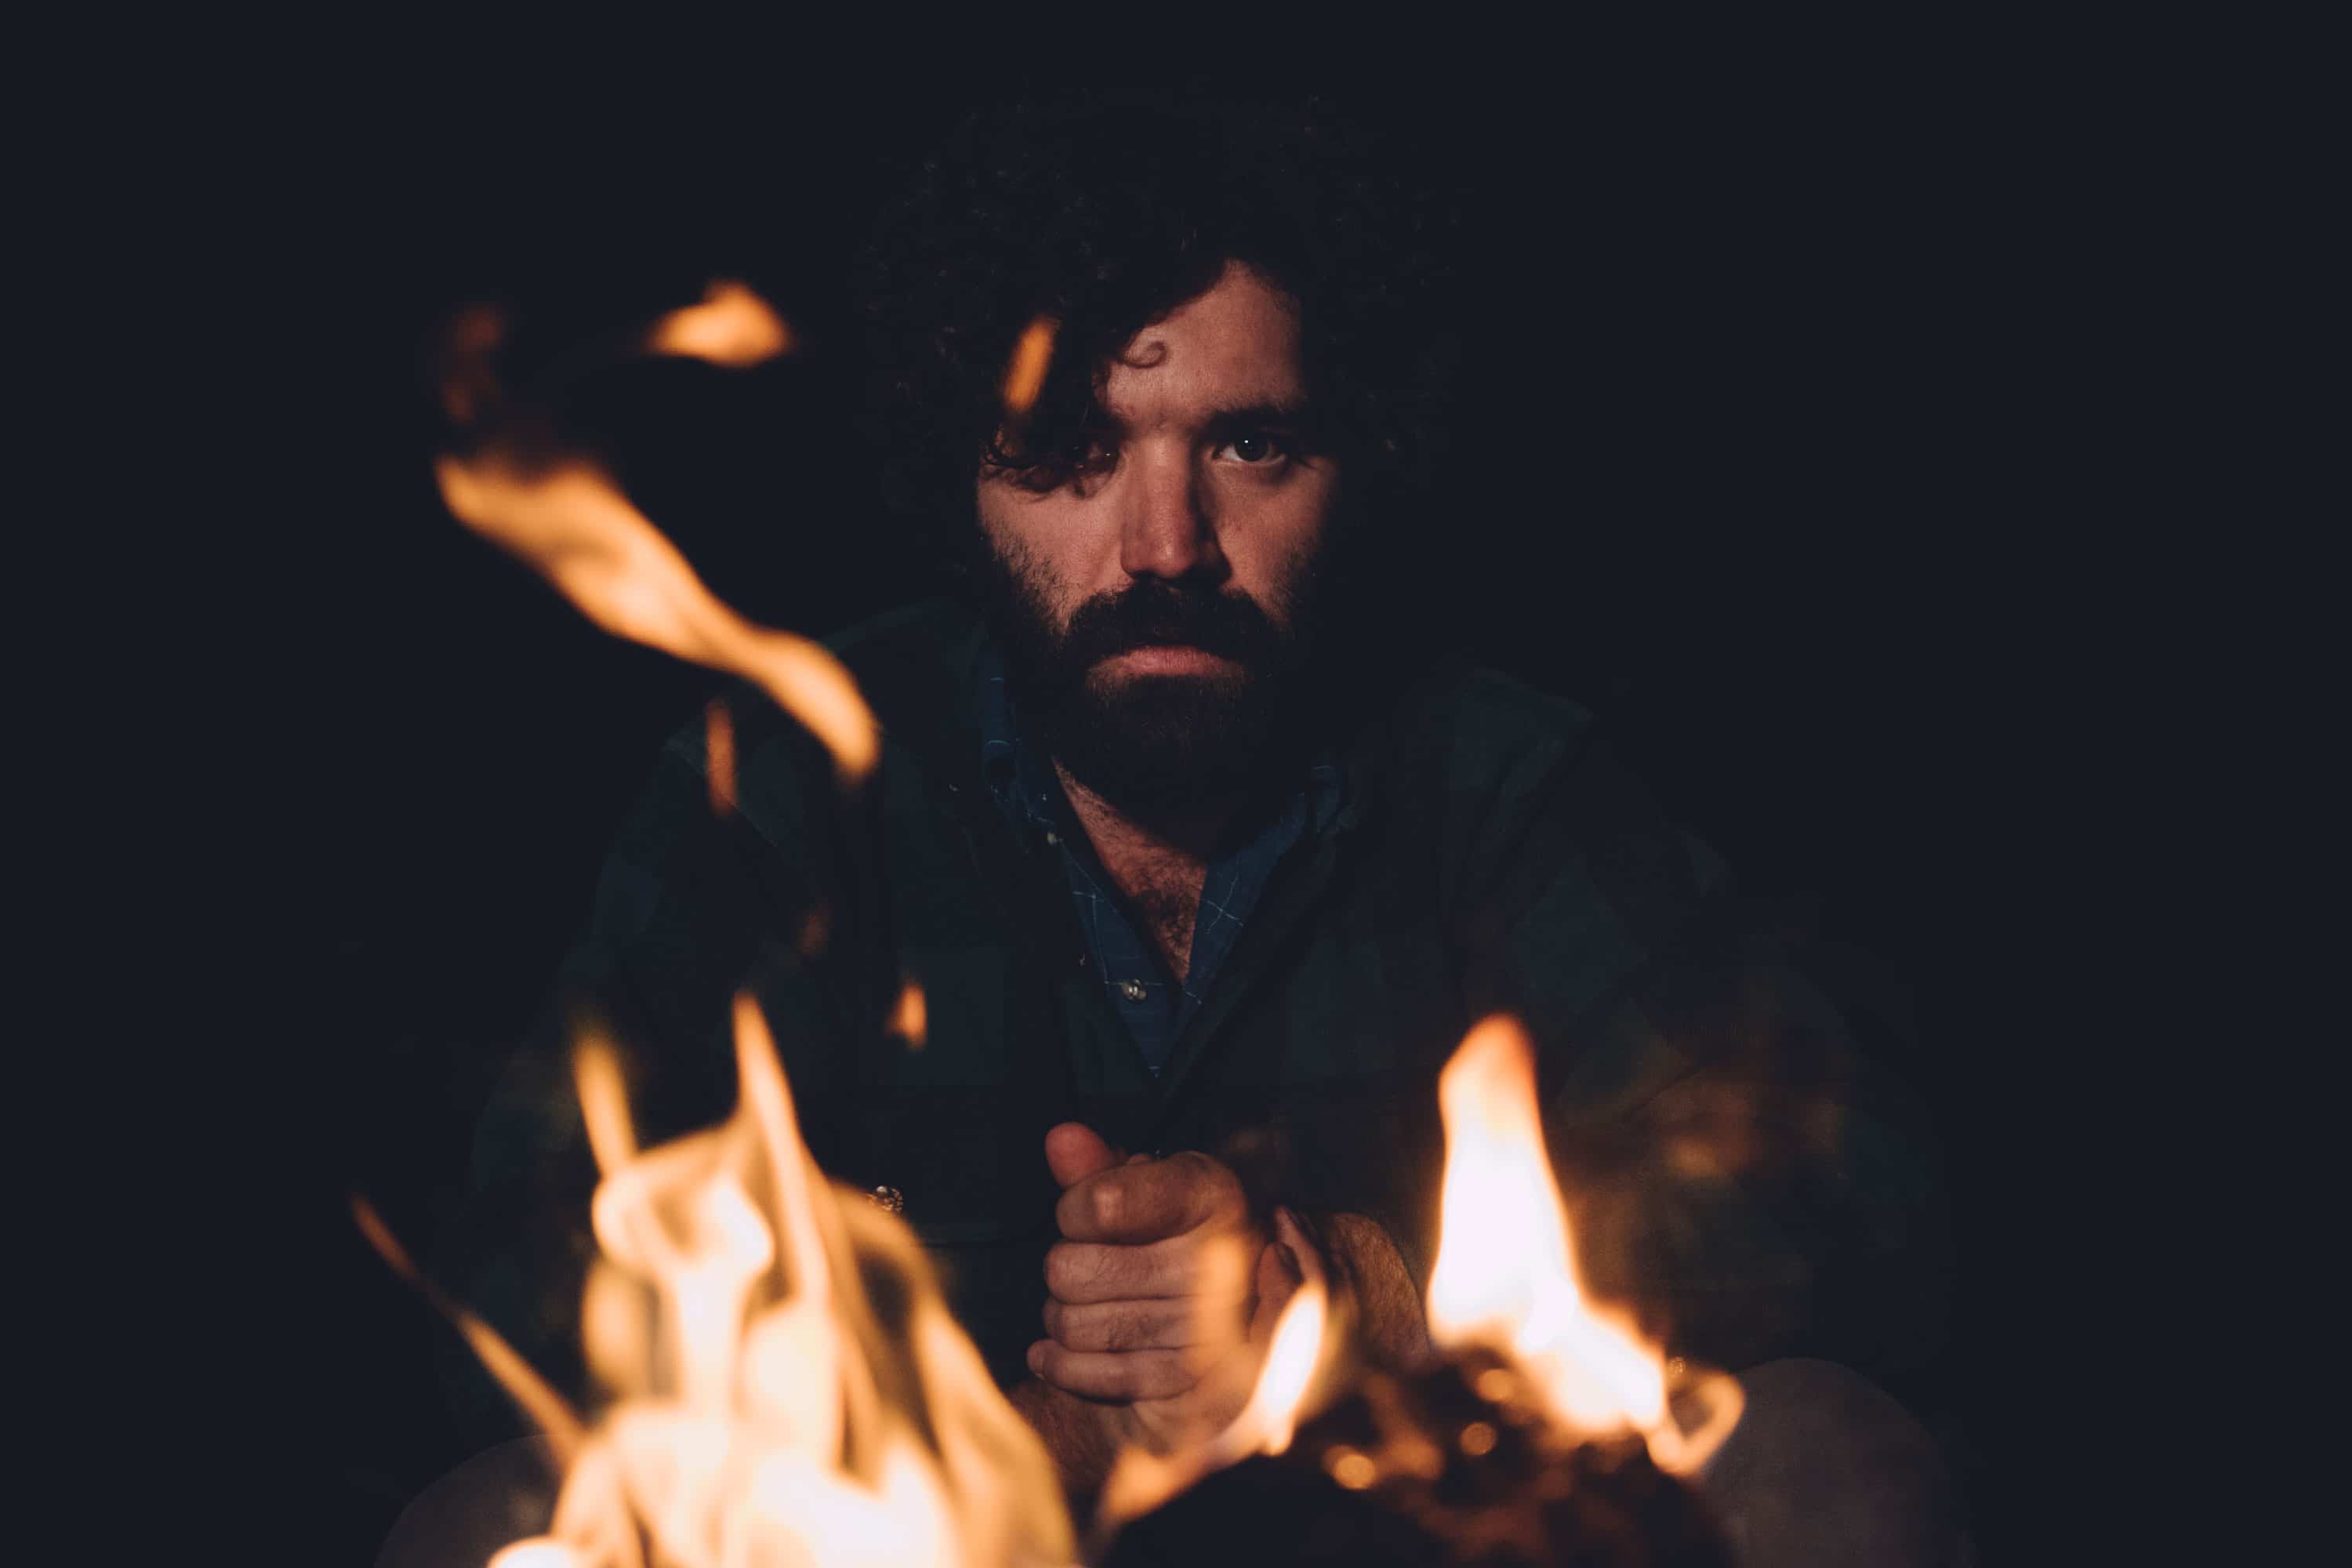 Andrew Duhon Heads Out West In New Video For “Heart Of A Man”